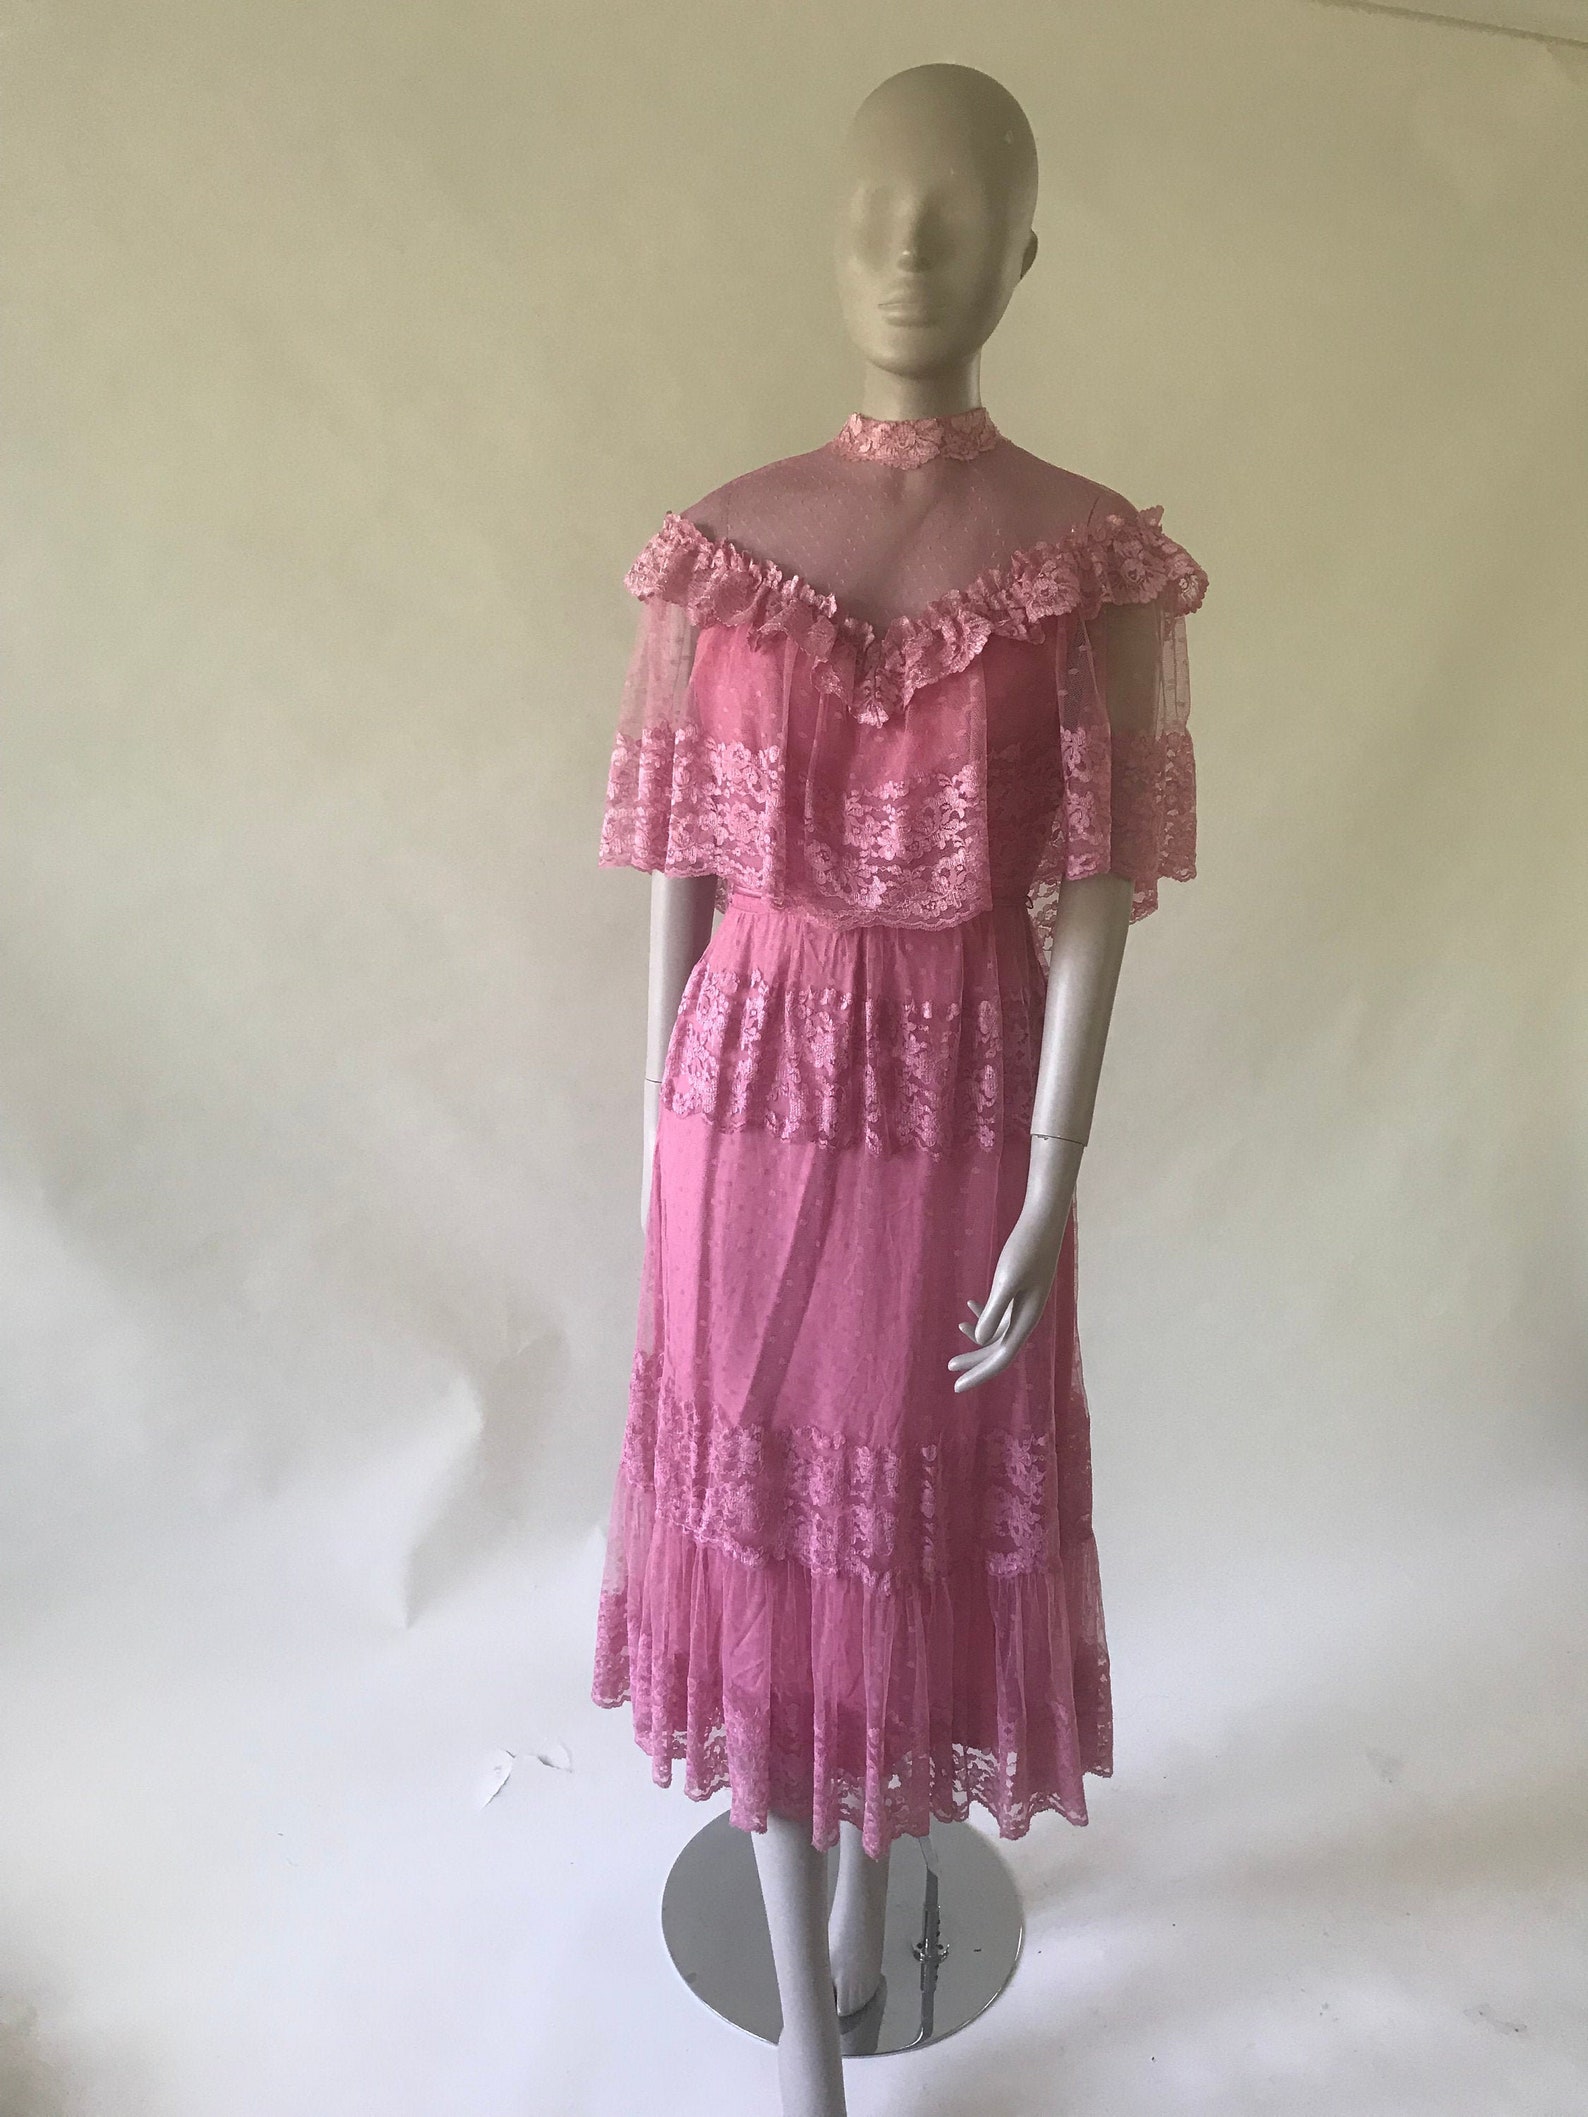 Vintage Late 1970s Early 1980s Pink Lace Bridesmaids Dress - Etsy